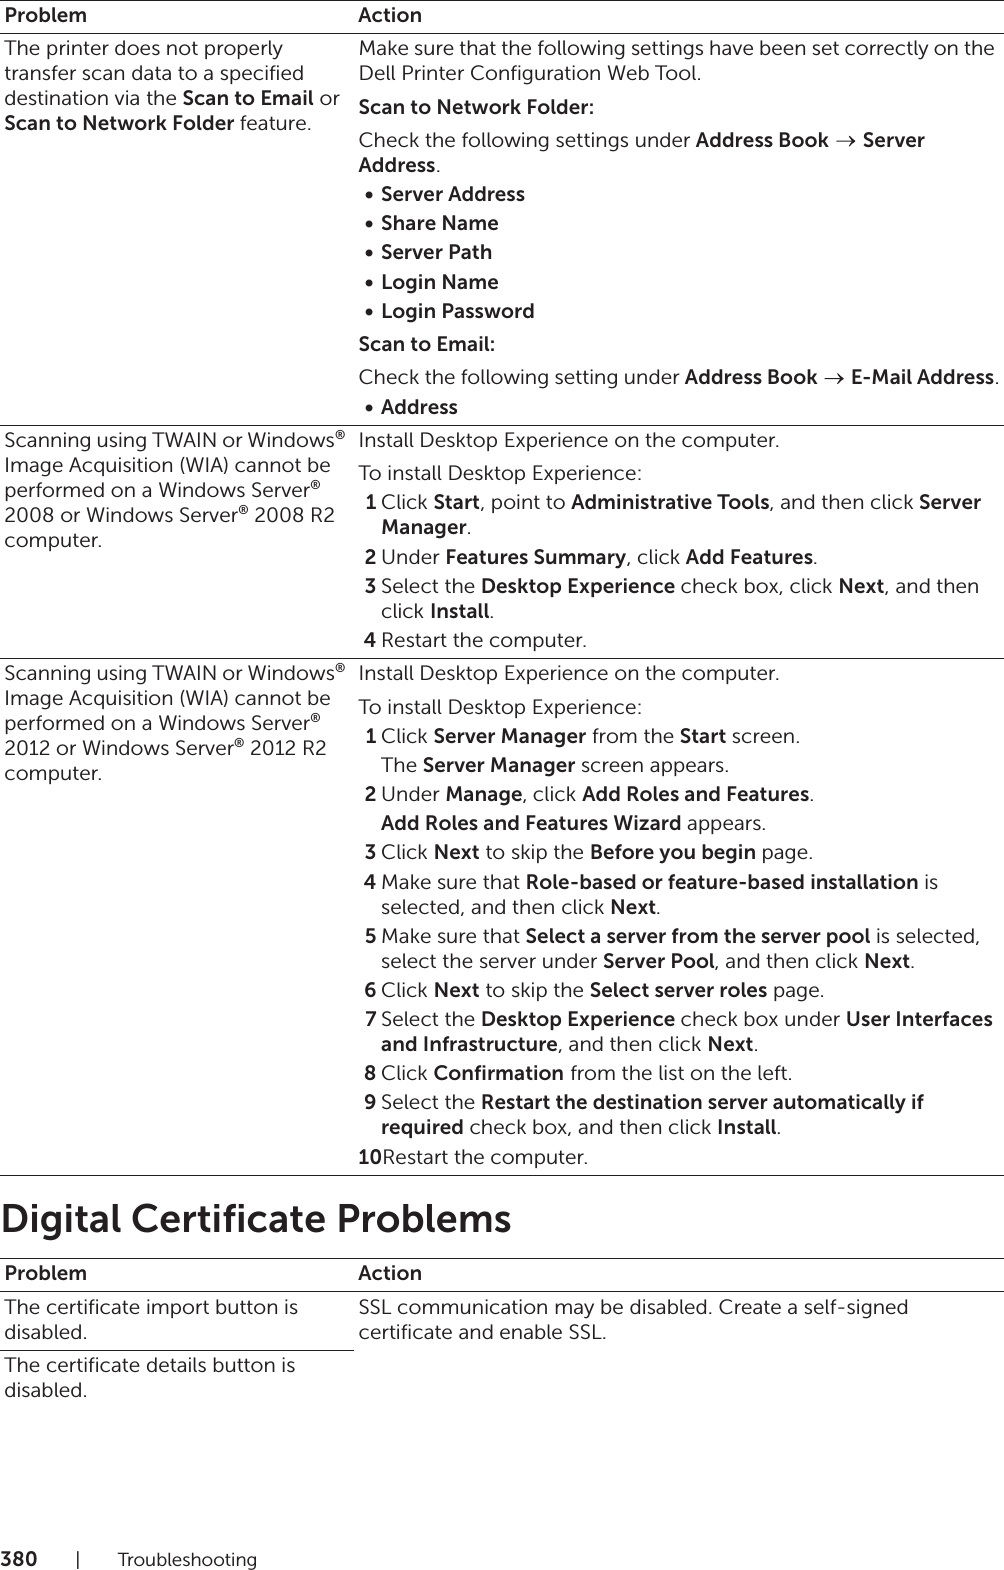 380|TroubleshootingDigital Certificate ProblemsThe printer does not properly transfer scan data to a specified destination via the Scan to Email or Scan to Network Folder feature.Make sure that the following settings have been set correctly on the Dell Printer Configuration Web Tool.Scan to Network Folder:Check the following settings under Address Book   Server Address.• Server Address•Share Name• Server Path•Login Name•Login PasswordScan to Email:Check the following setting under Address Book   E-Mail Address.• AddressScanning using TWAIN or Windows® Image Acquisition (WIA) cannot be performed on a Windows Server® 2008 or Windows Server® 2008 R2 computer.Install Desktop Experience on the computer.To install Desktop Experience:1Click Start, point to Administrative Tools, and then click Server Manager.2Under Features Summary, click Add Features.3Select the Desktop Experience check box, click Next, and then click Install.4Restart the computer.Scanning using TWAIN or Windows® Image Acquisition (WIA) cannot be performed on a Windows Server® 2012 or Windows Server® 2012 R2 computer.Install Desktop Experience on the computer.To install Desktop Experience:1Click Server Manager from the Start screen.The Server Manager screen appears.2Under Manage, click Add Roles and Features.Add Roles and Features Wizard appears.3Click Next to skip the Before you begin page.4Make sure that Role-based or feature-based installation is selected, and then click Next.5Make sure that Select a server from the server pool is selected, select the server under Server Pool, and then click Next.6Click Next to skip the Select server roles page.7Select the Desktop Experience check box under User Interfaces and Infrastructure, and then click Next.8Click Confirmation from the list on the left.9Select the Restart the destination server automatically if required check box, and then click Install.10Restart the computer.Problem ActionThe certificate import button is disabled.SSL communication may be disabled. Create a self-signed certificate and enable SSL.The certificate details button is disabled.Problem Action